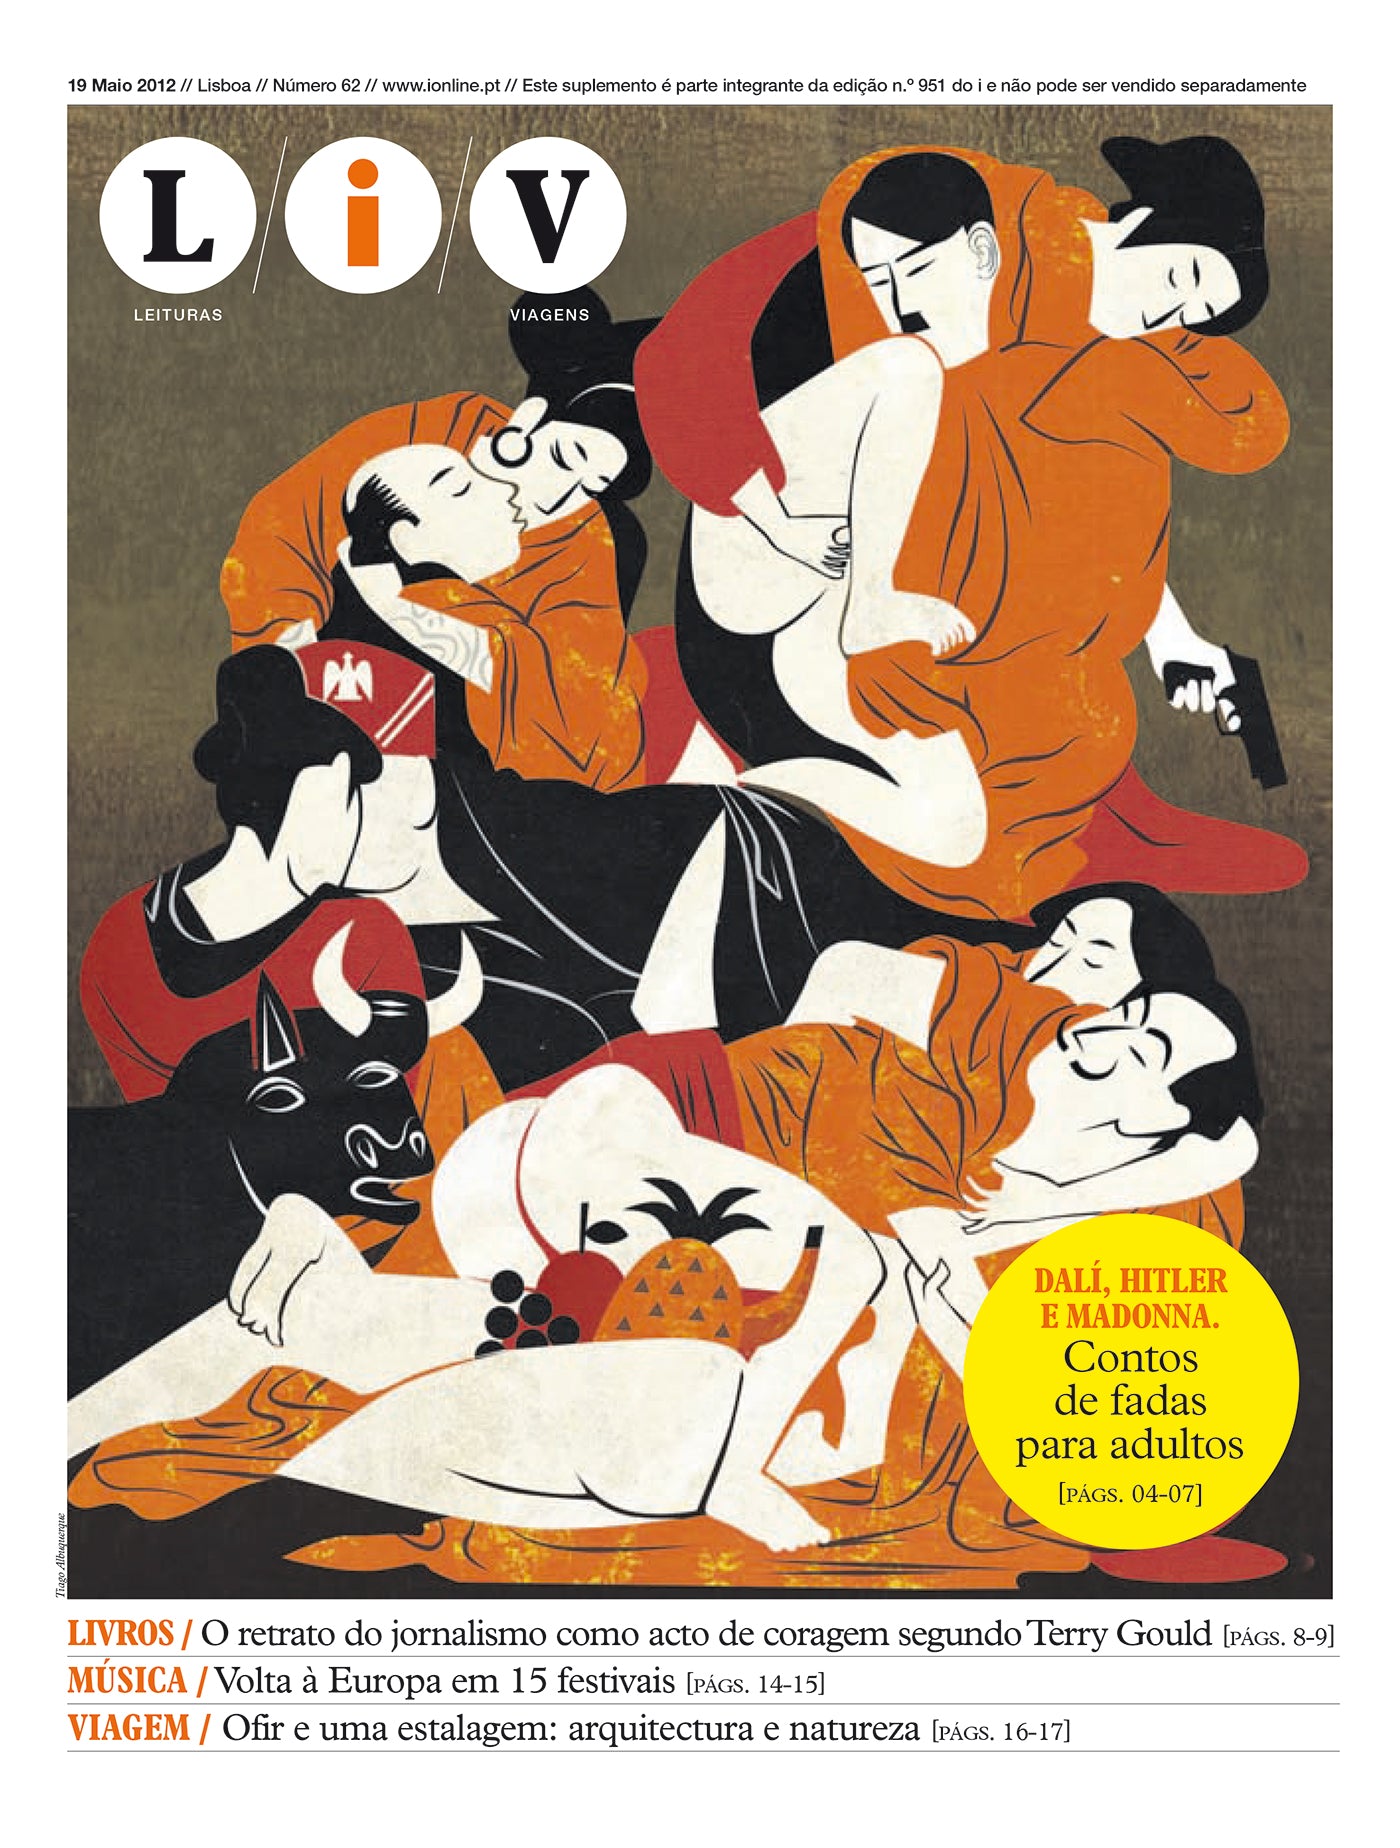 When it comes to creating expressive print media, Javier Errea is the voice of a generation